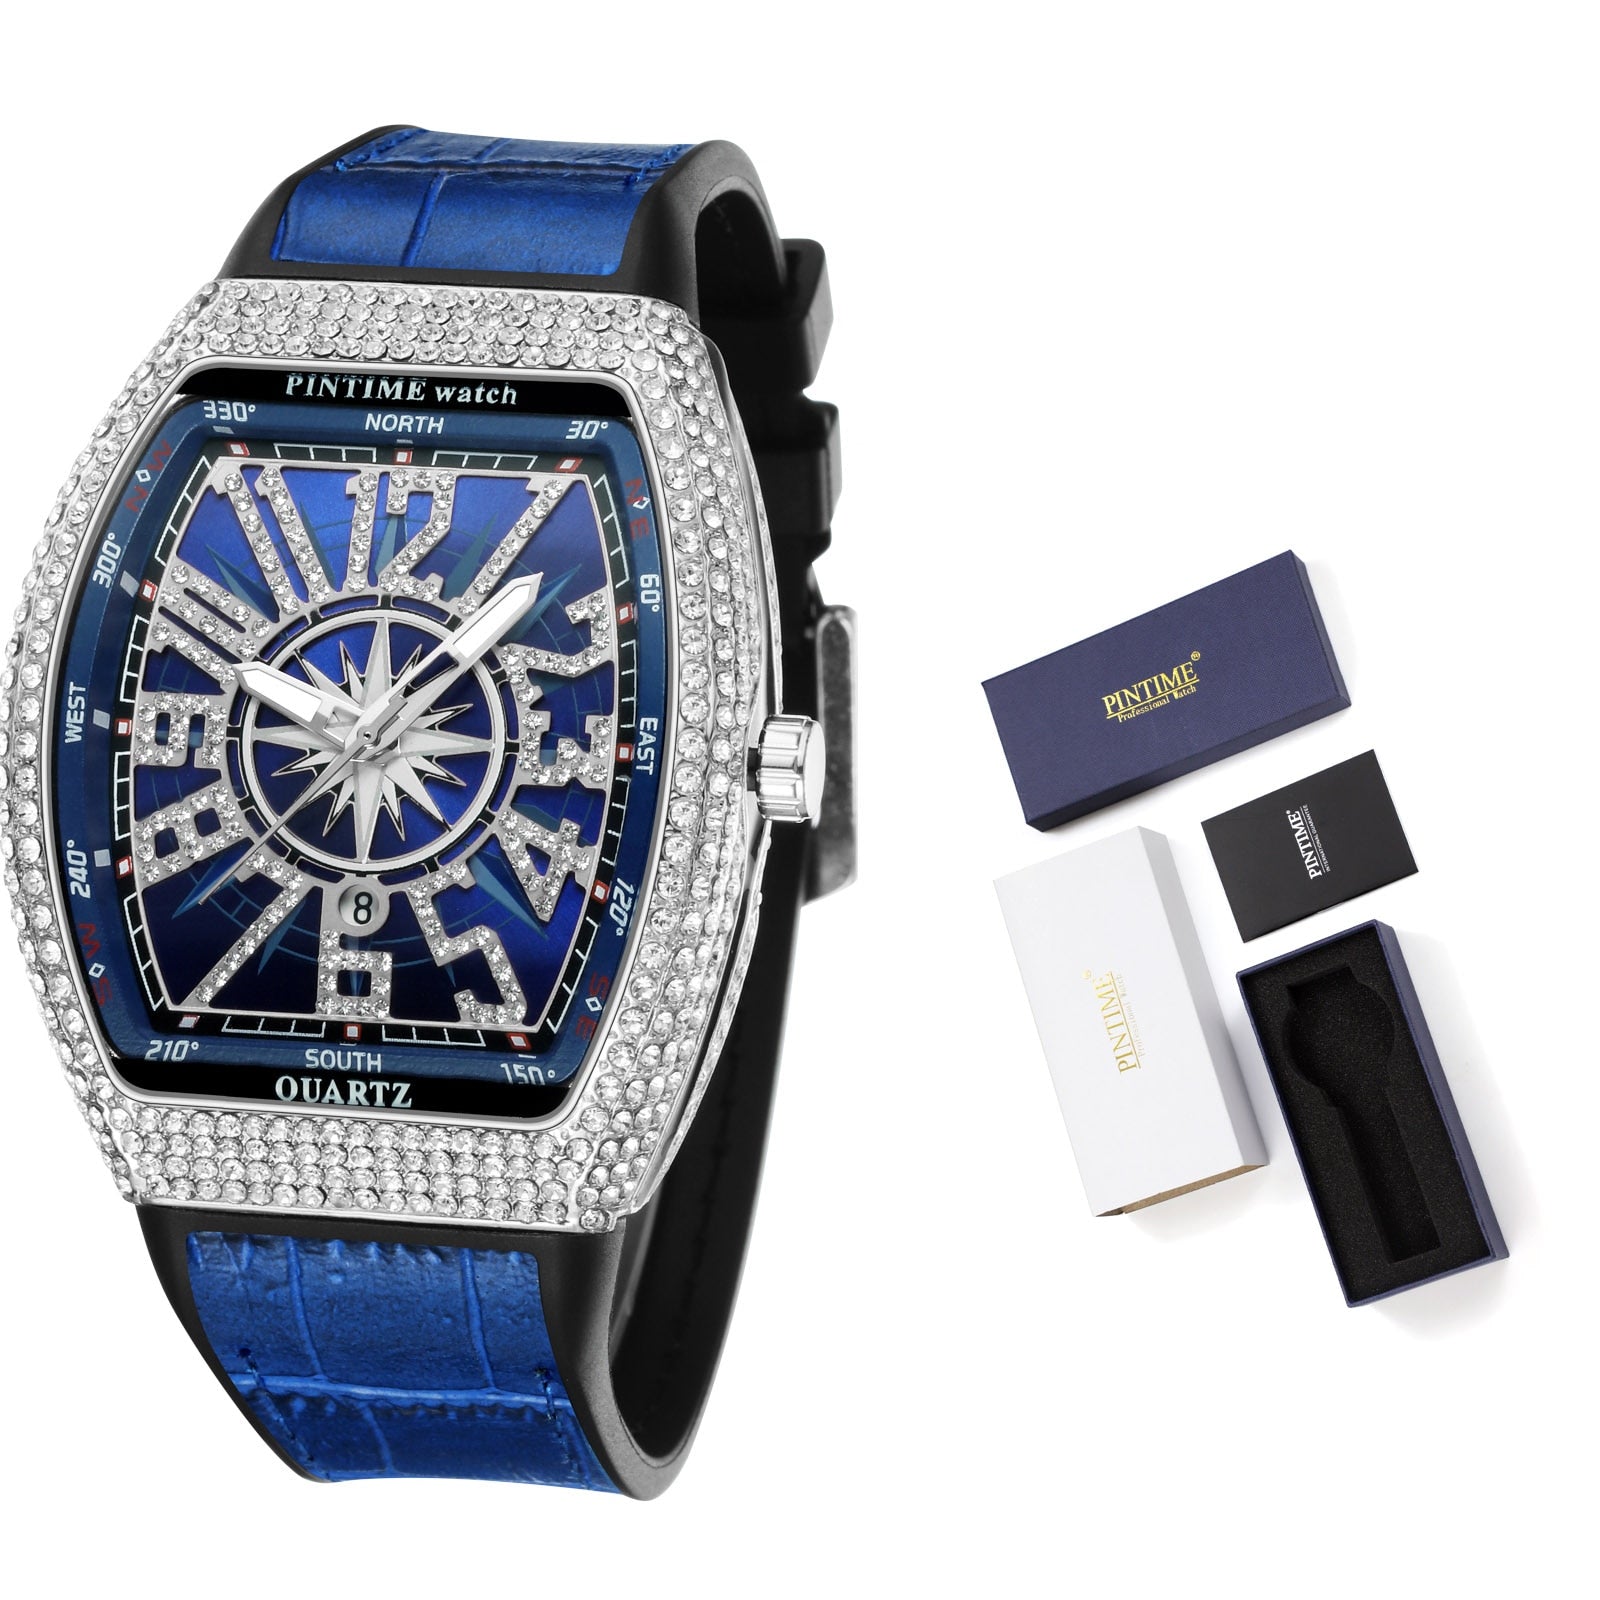 Hot Sale Men Fashion Luxury Watch Diamond Iced Out Waterproof Quartz Wristwatch Blue Silicone Band Party Casual Dress Watches